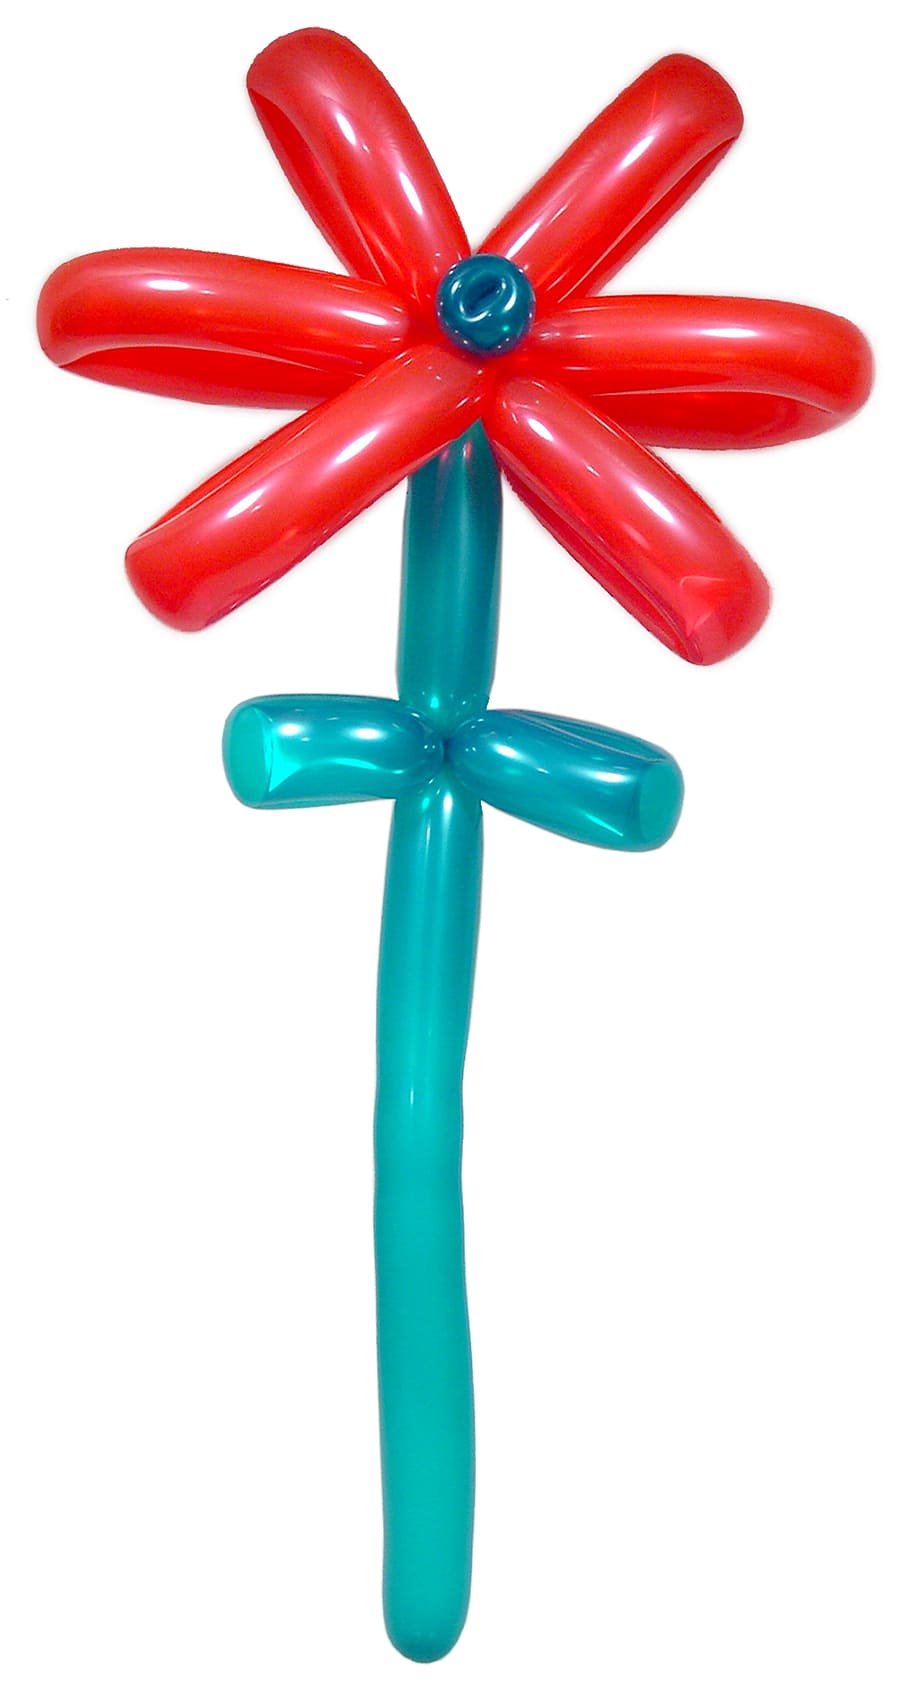 red and blue flower-themed balloon, sculpture, fun, child, colorful